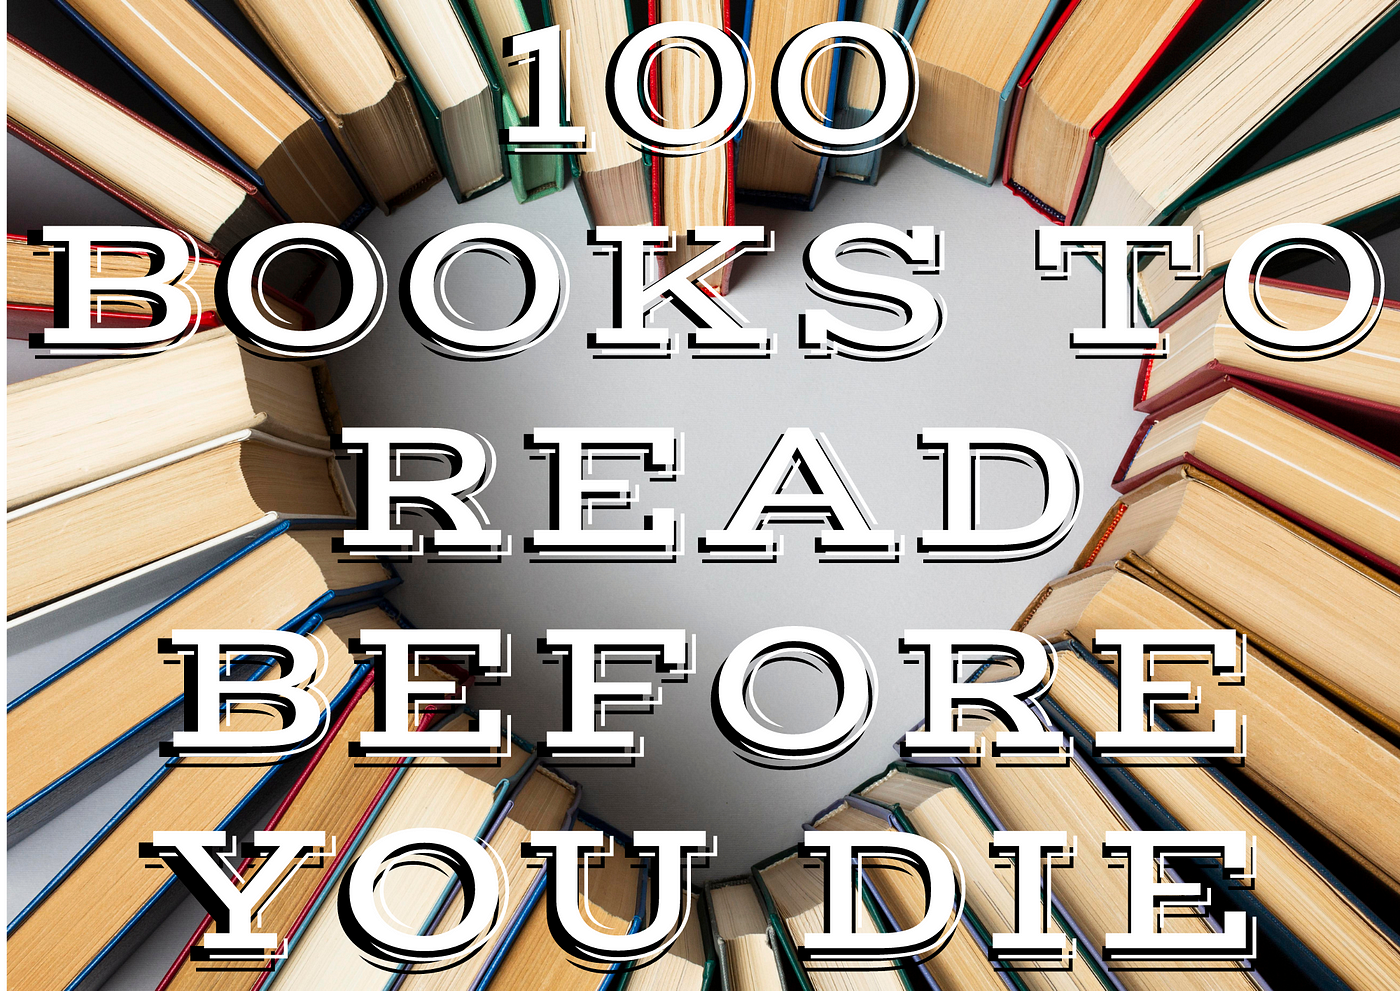 The Ultimate “100 Books To Read Before You Die List” by Jose Luis Ontanon Nunez ILLUMINATION Medium pic